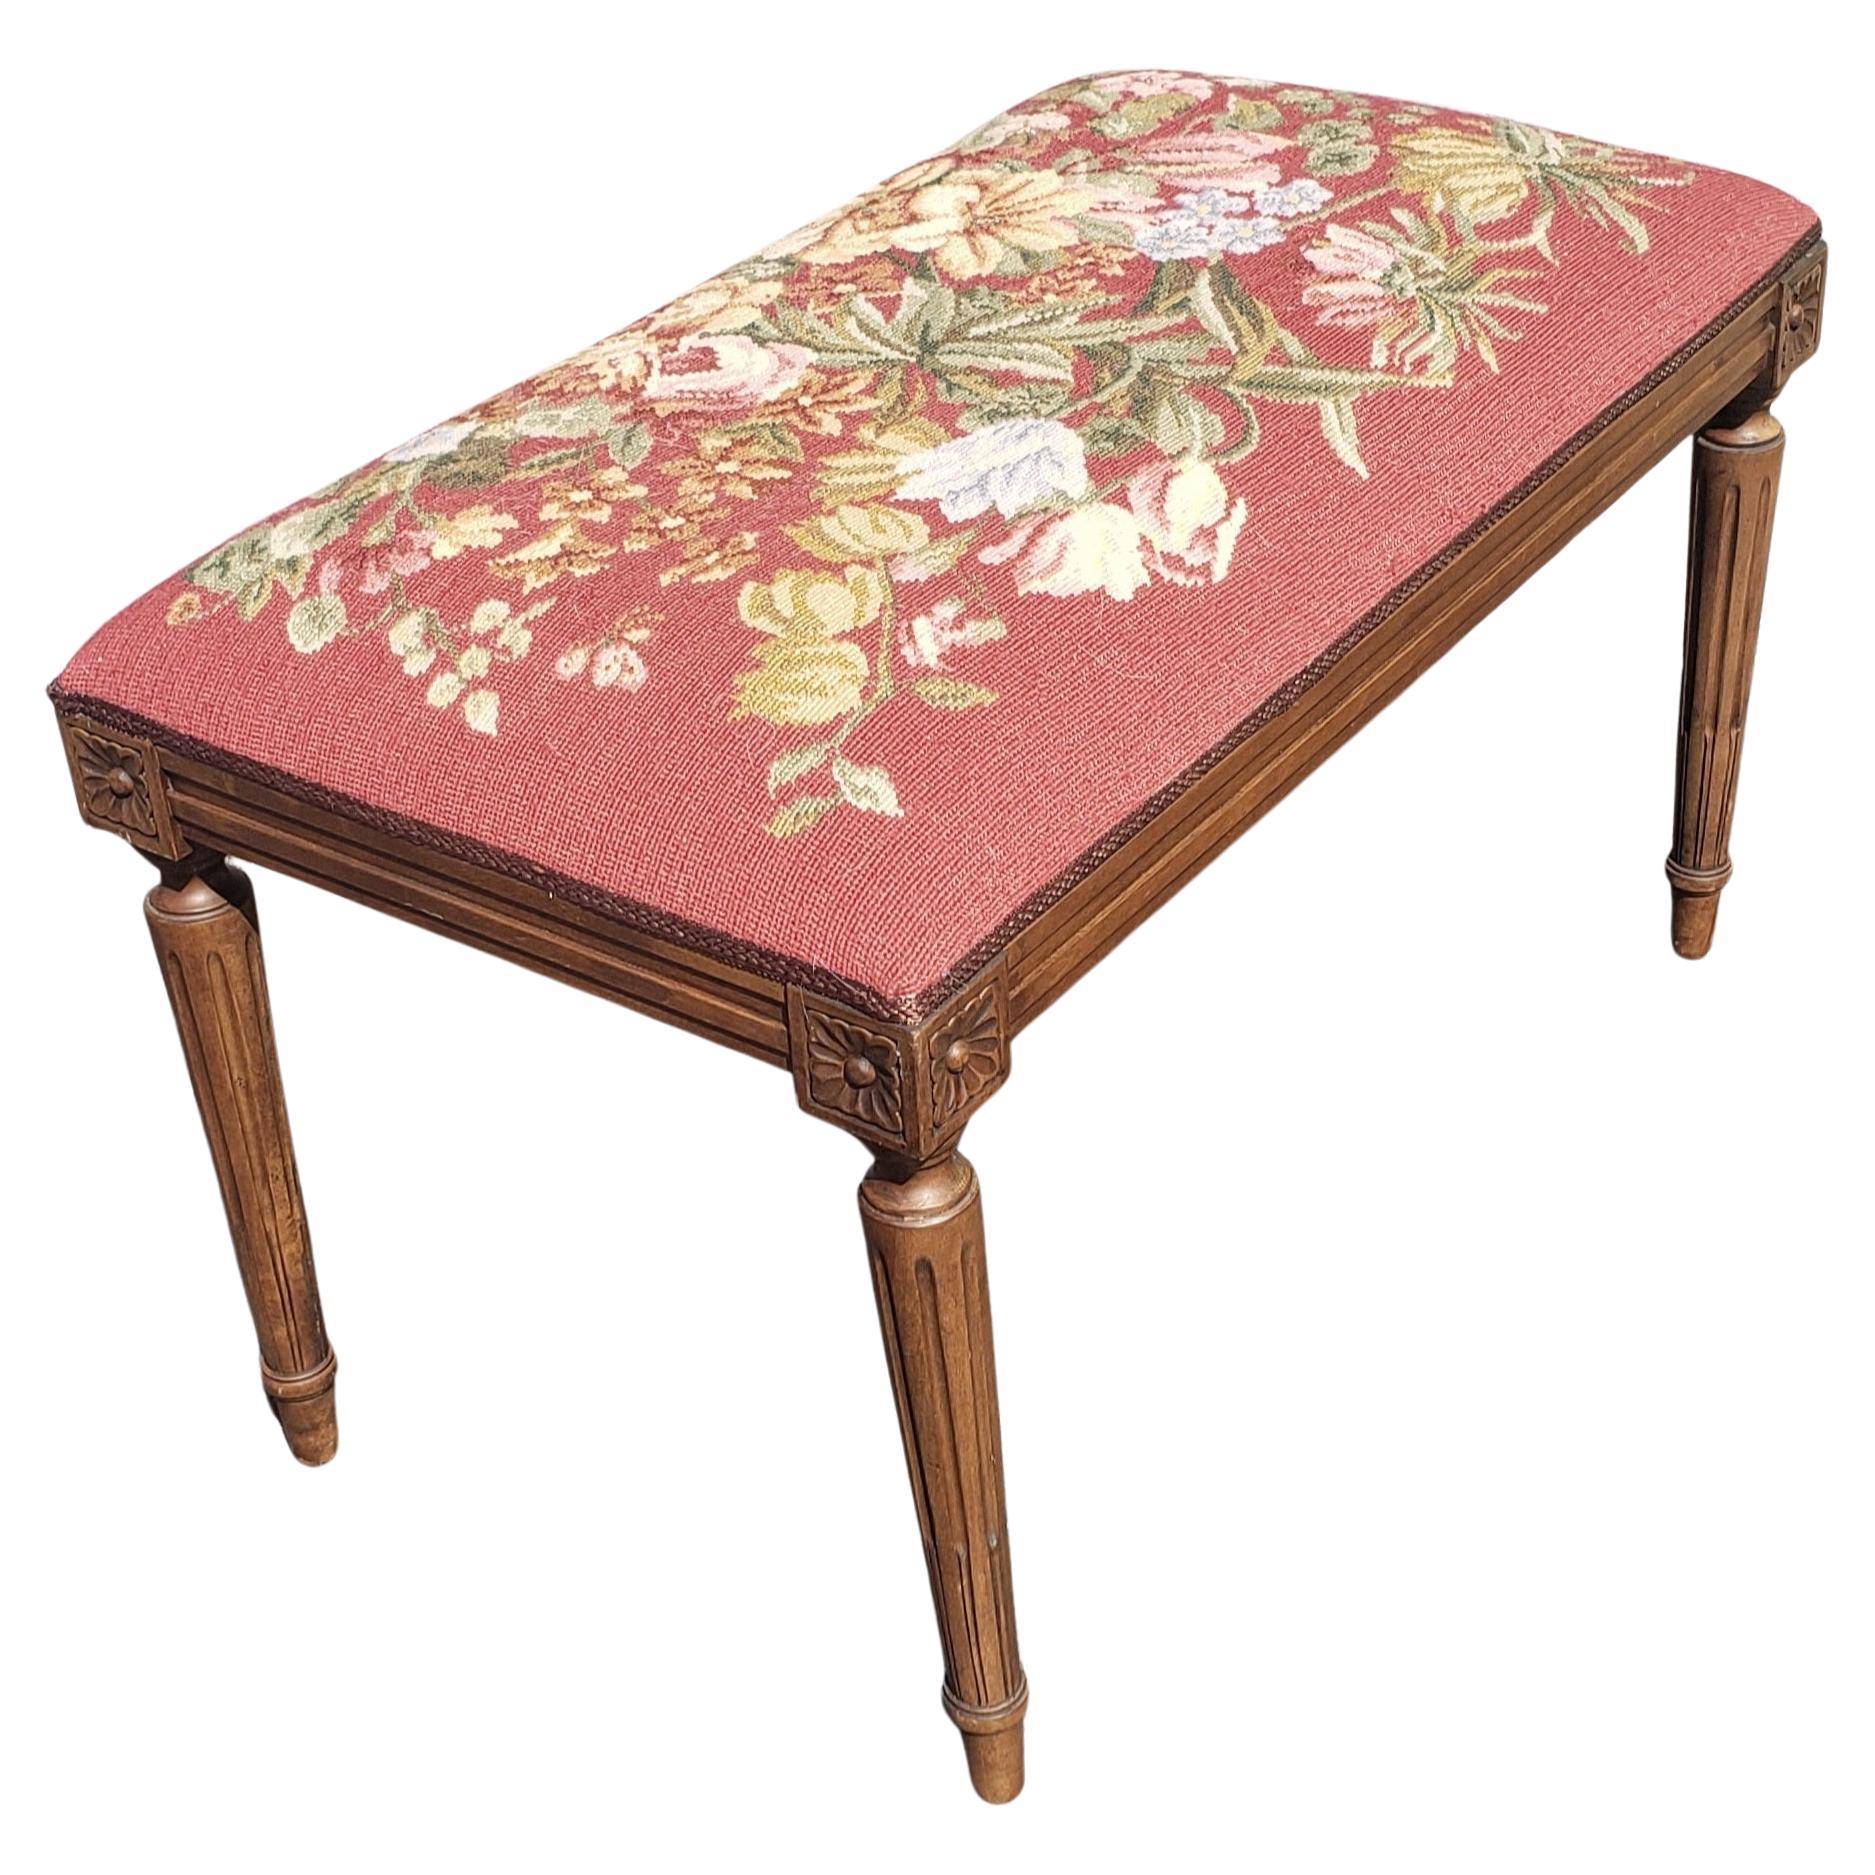 Upholstery Louis XVI Style Walnut and Needlepoint Upholstered Tabouret Bench For Sale